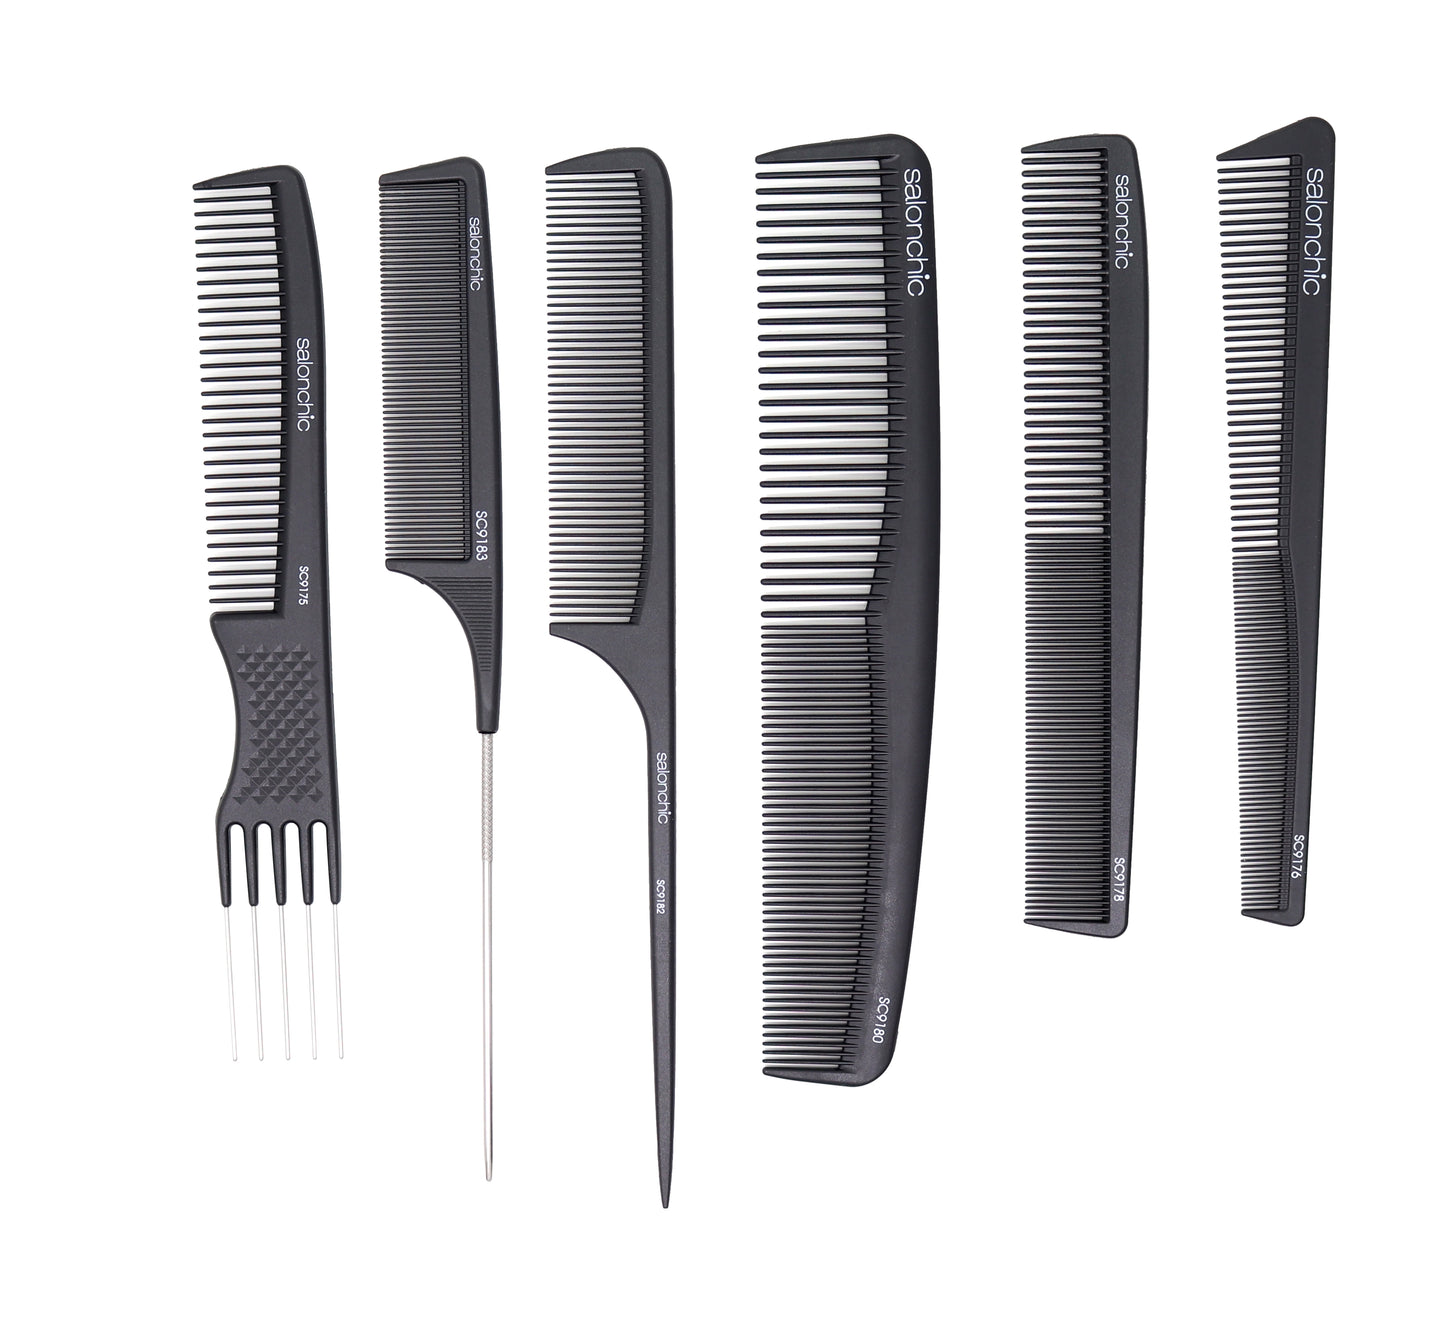 Salonchic Carbon Combs Teasing Pin Tail Rat Tail Styling Weaving Barber Cutting Tapered Heat Resistant Static Free.